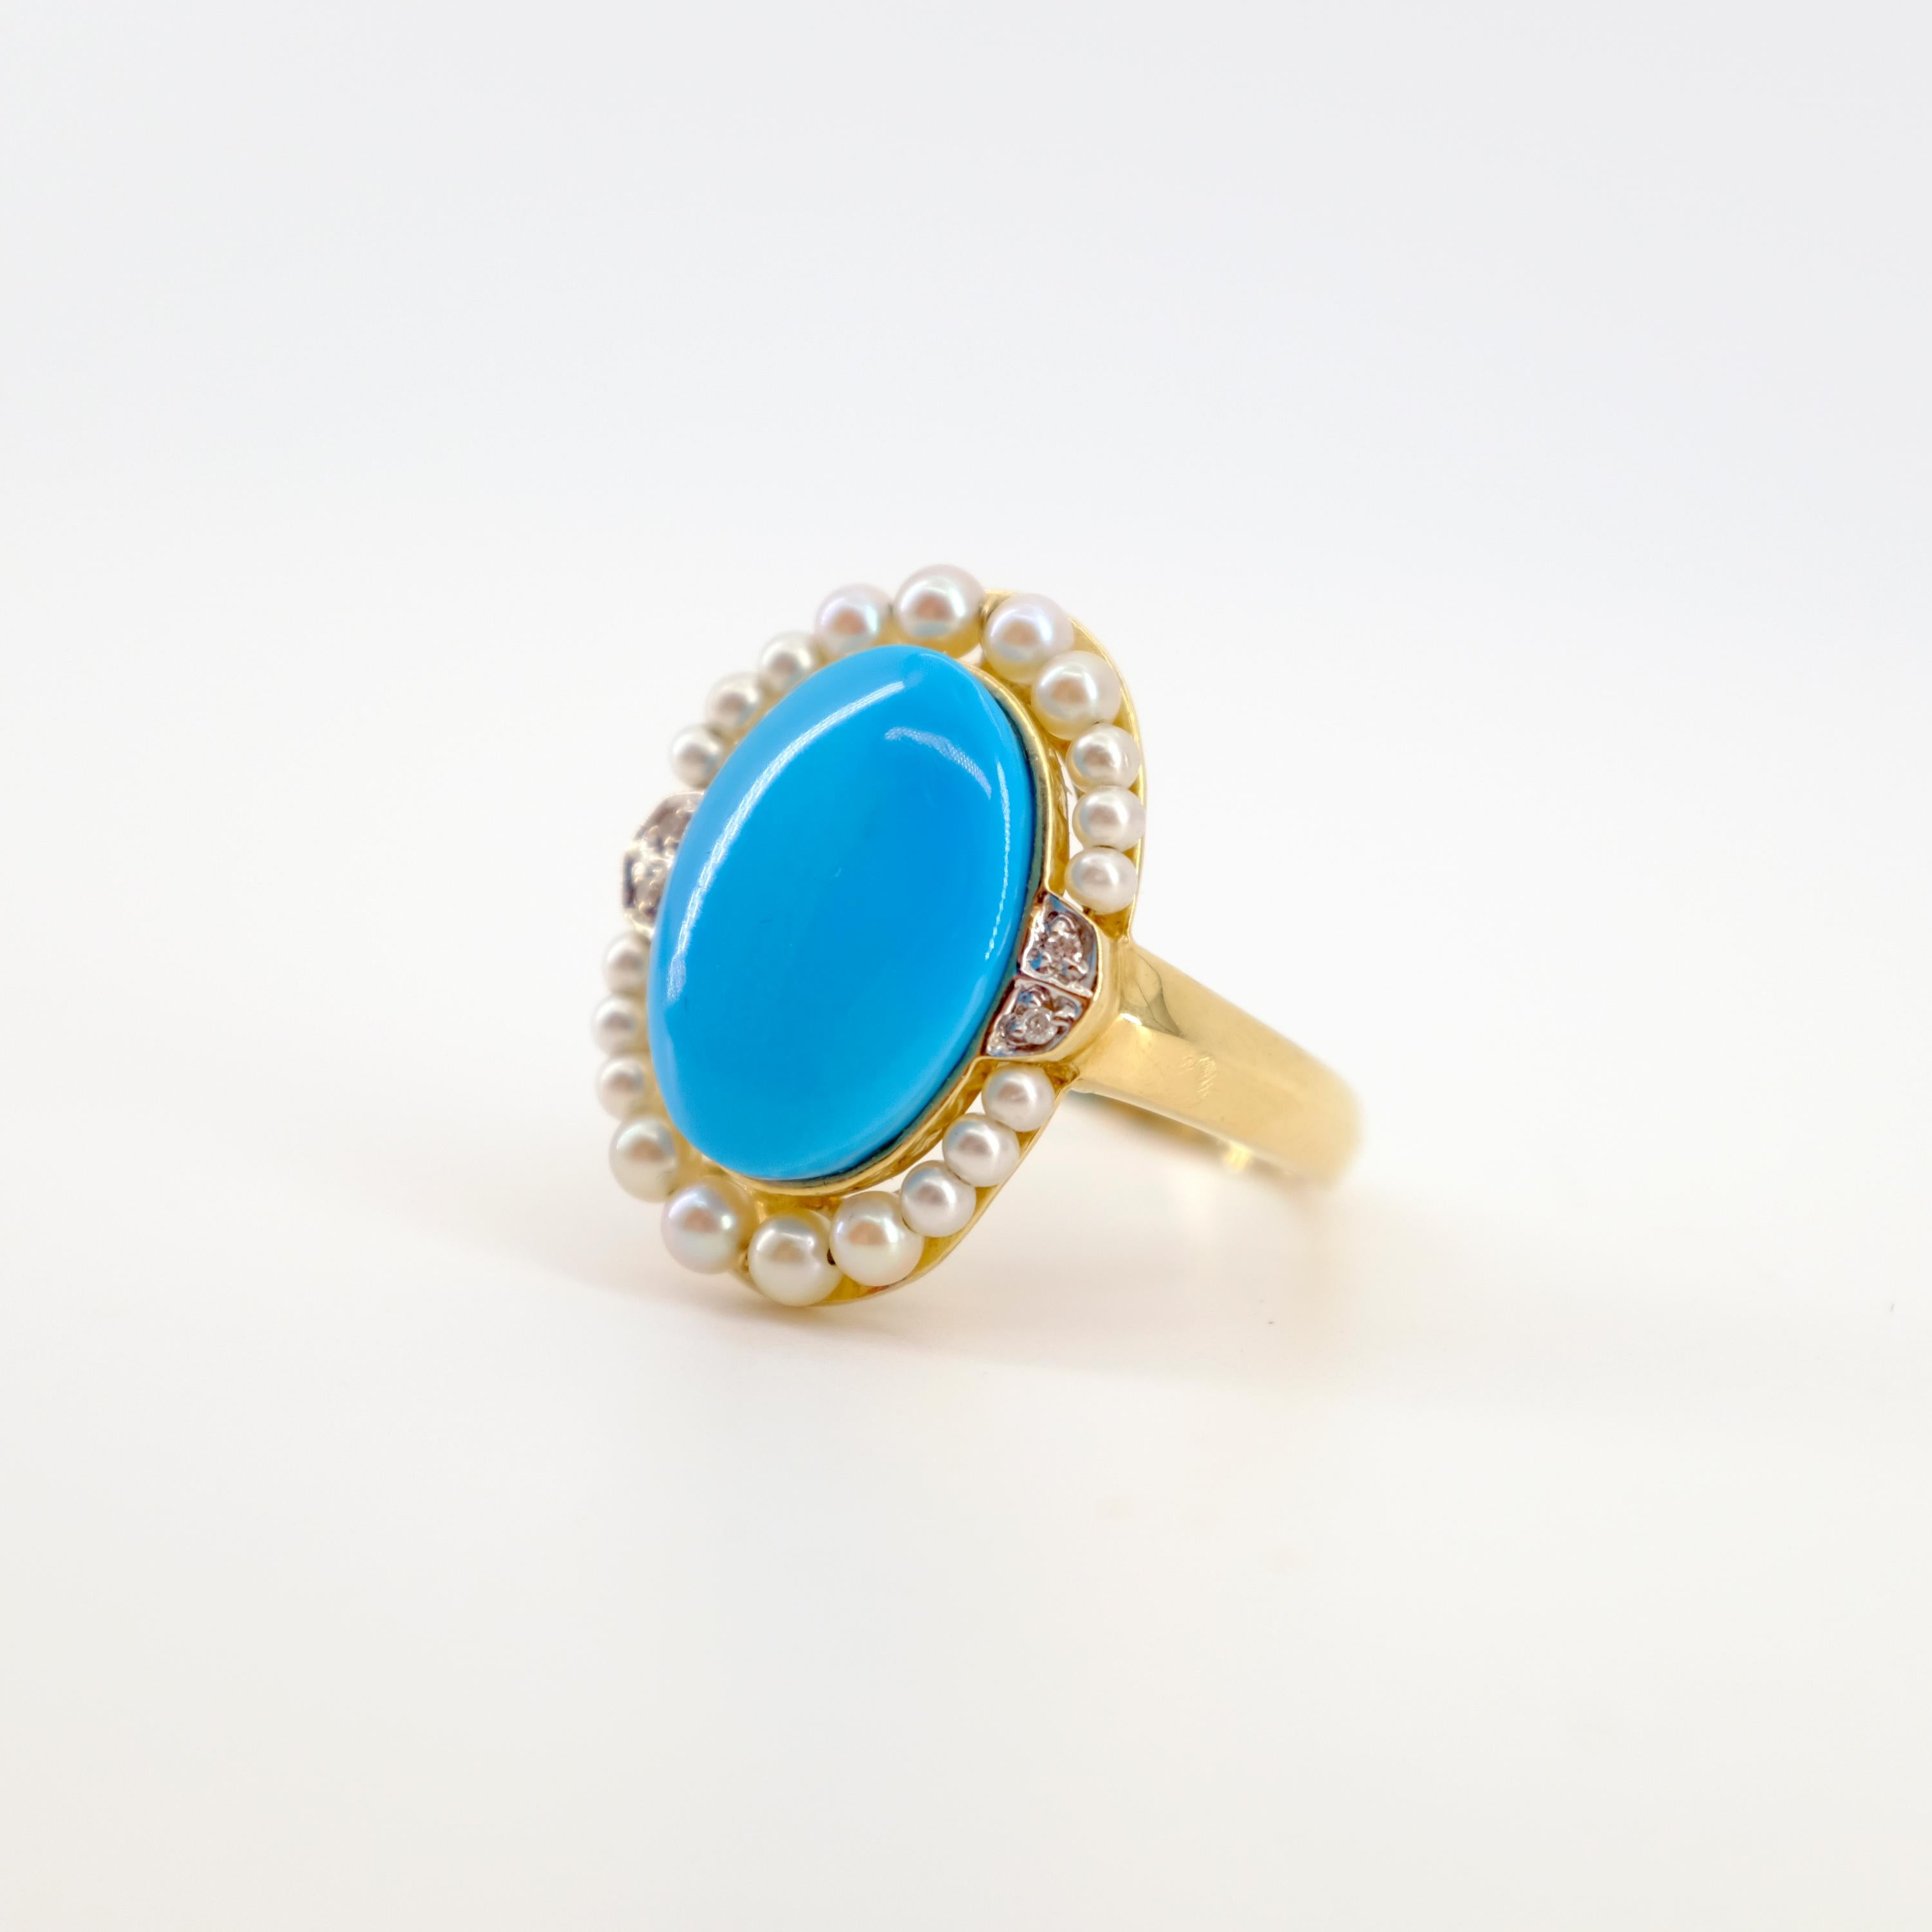 Many wonderful jewels have come from Hong Kong and this ring is no exception. This large and impressive ring features a mirror-finish turquoise stone in robin's egg blue. From the back you see stone matrix and gold work that looks like the